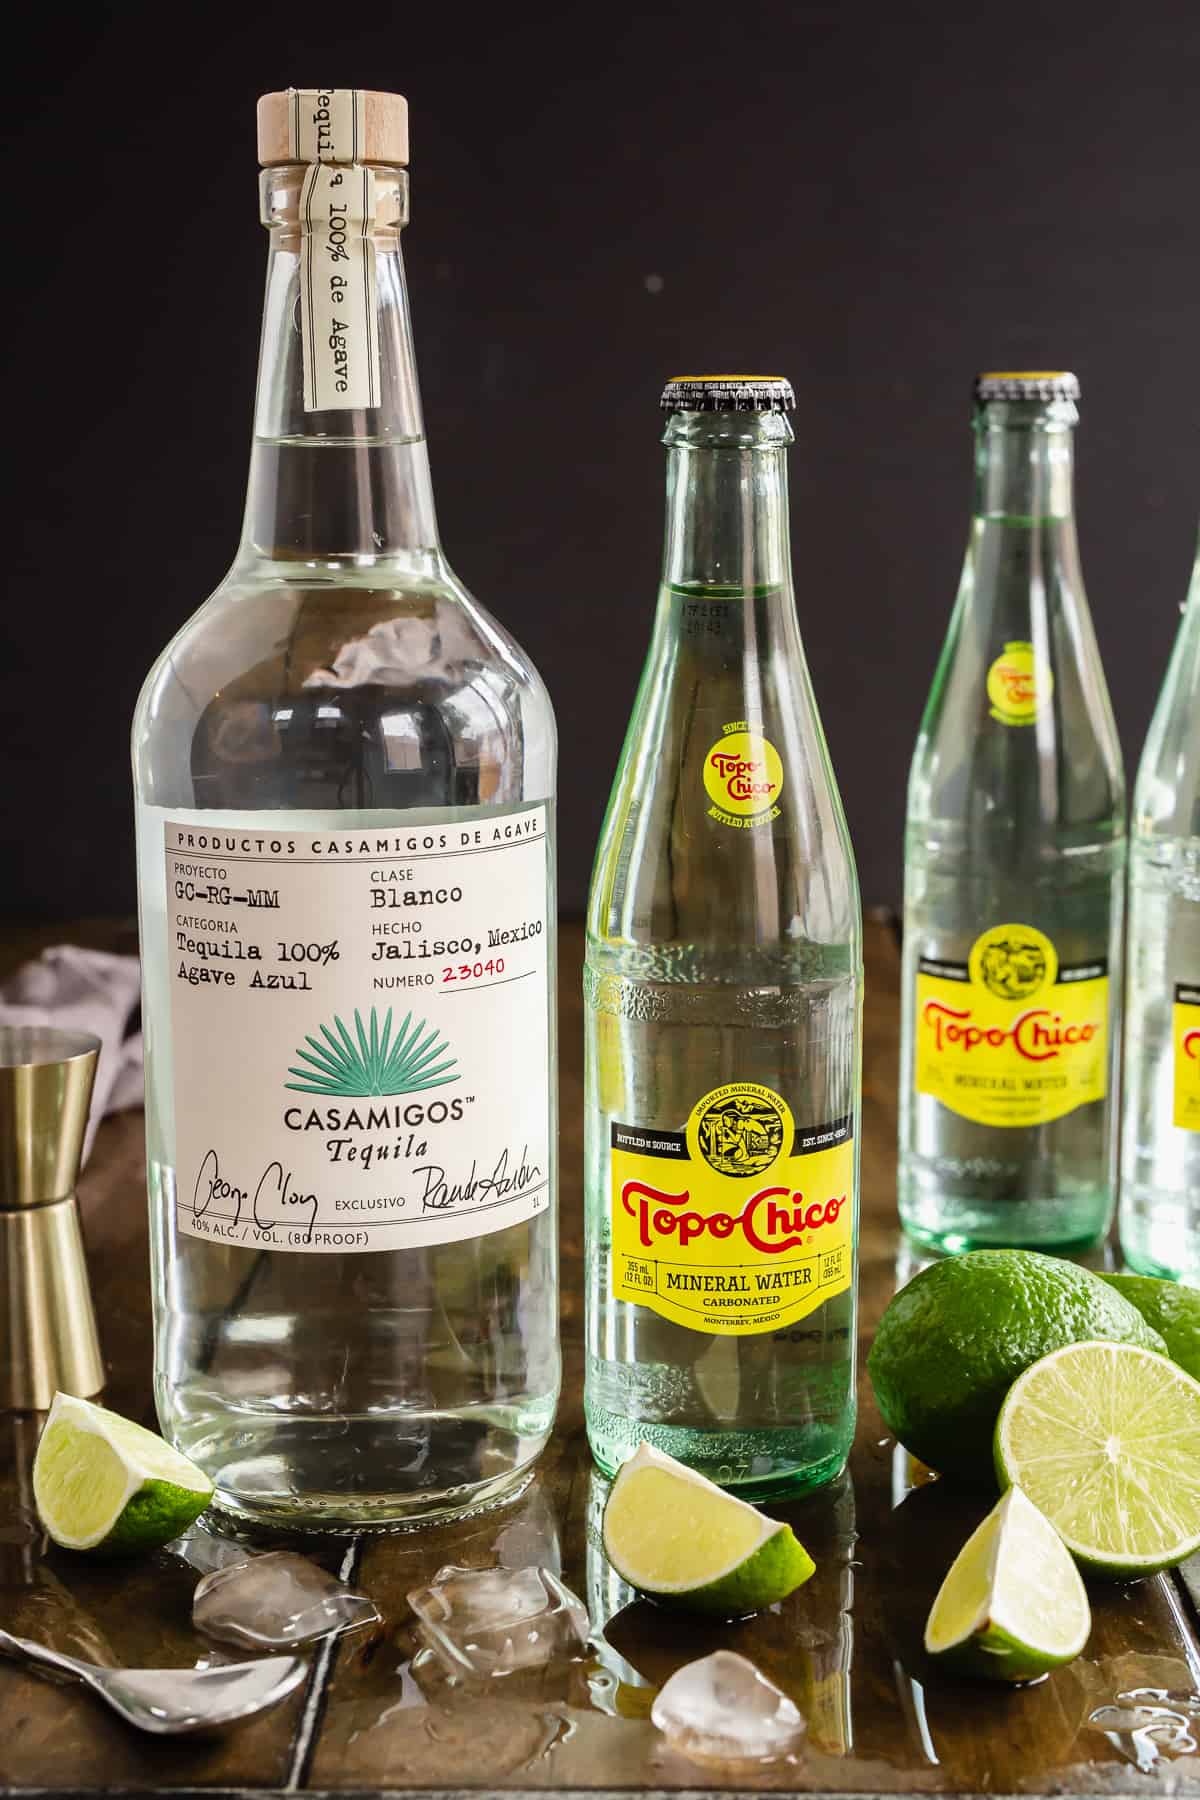 Casamigos Tequila, Topo Chico, and lime wedges.